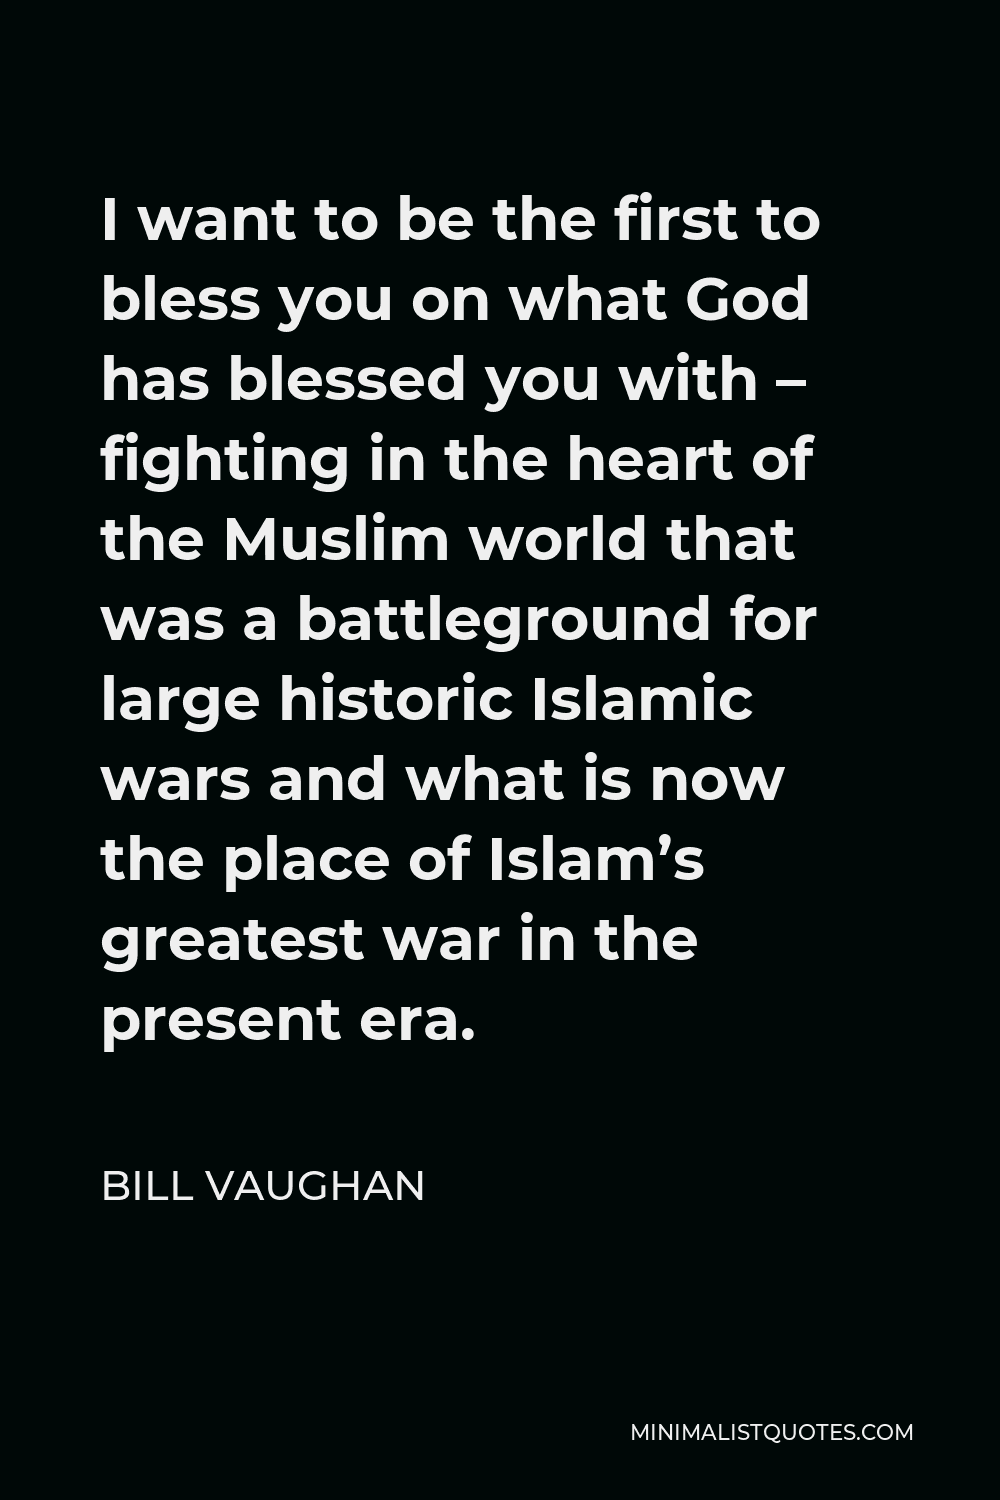 Bill Vaughan Quote - I want to be the first to bless you on what God has blessed you with – fighting in the heart of the Muslim world that was a battleground for large historic Islamic wars and what is now the place of Islam’s greatest war in the present era.